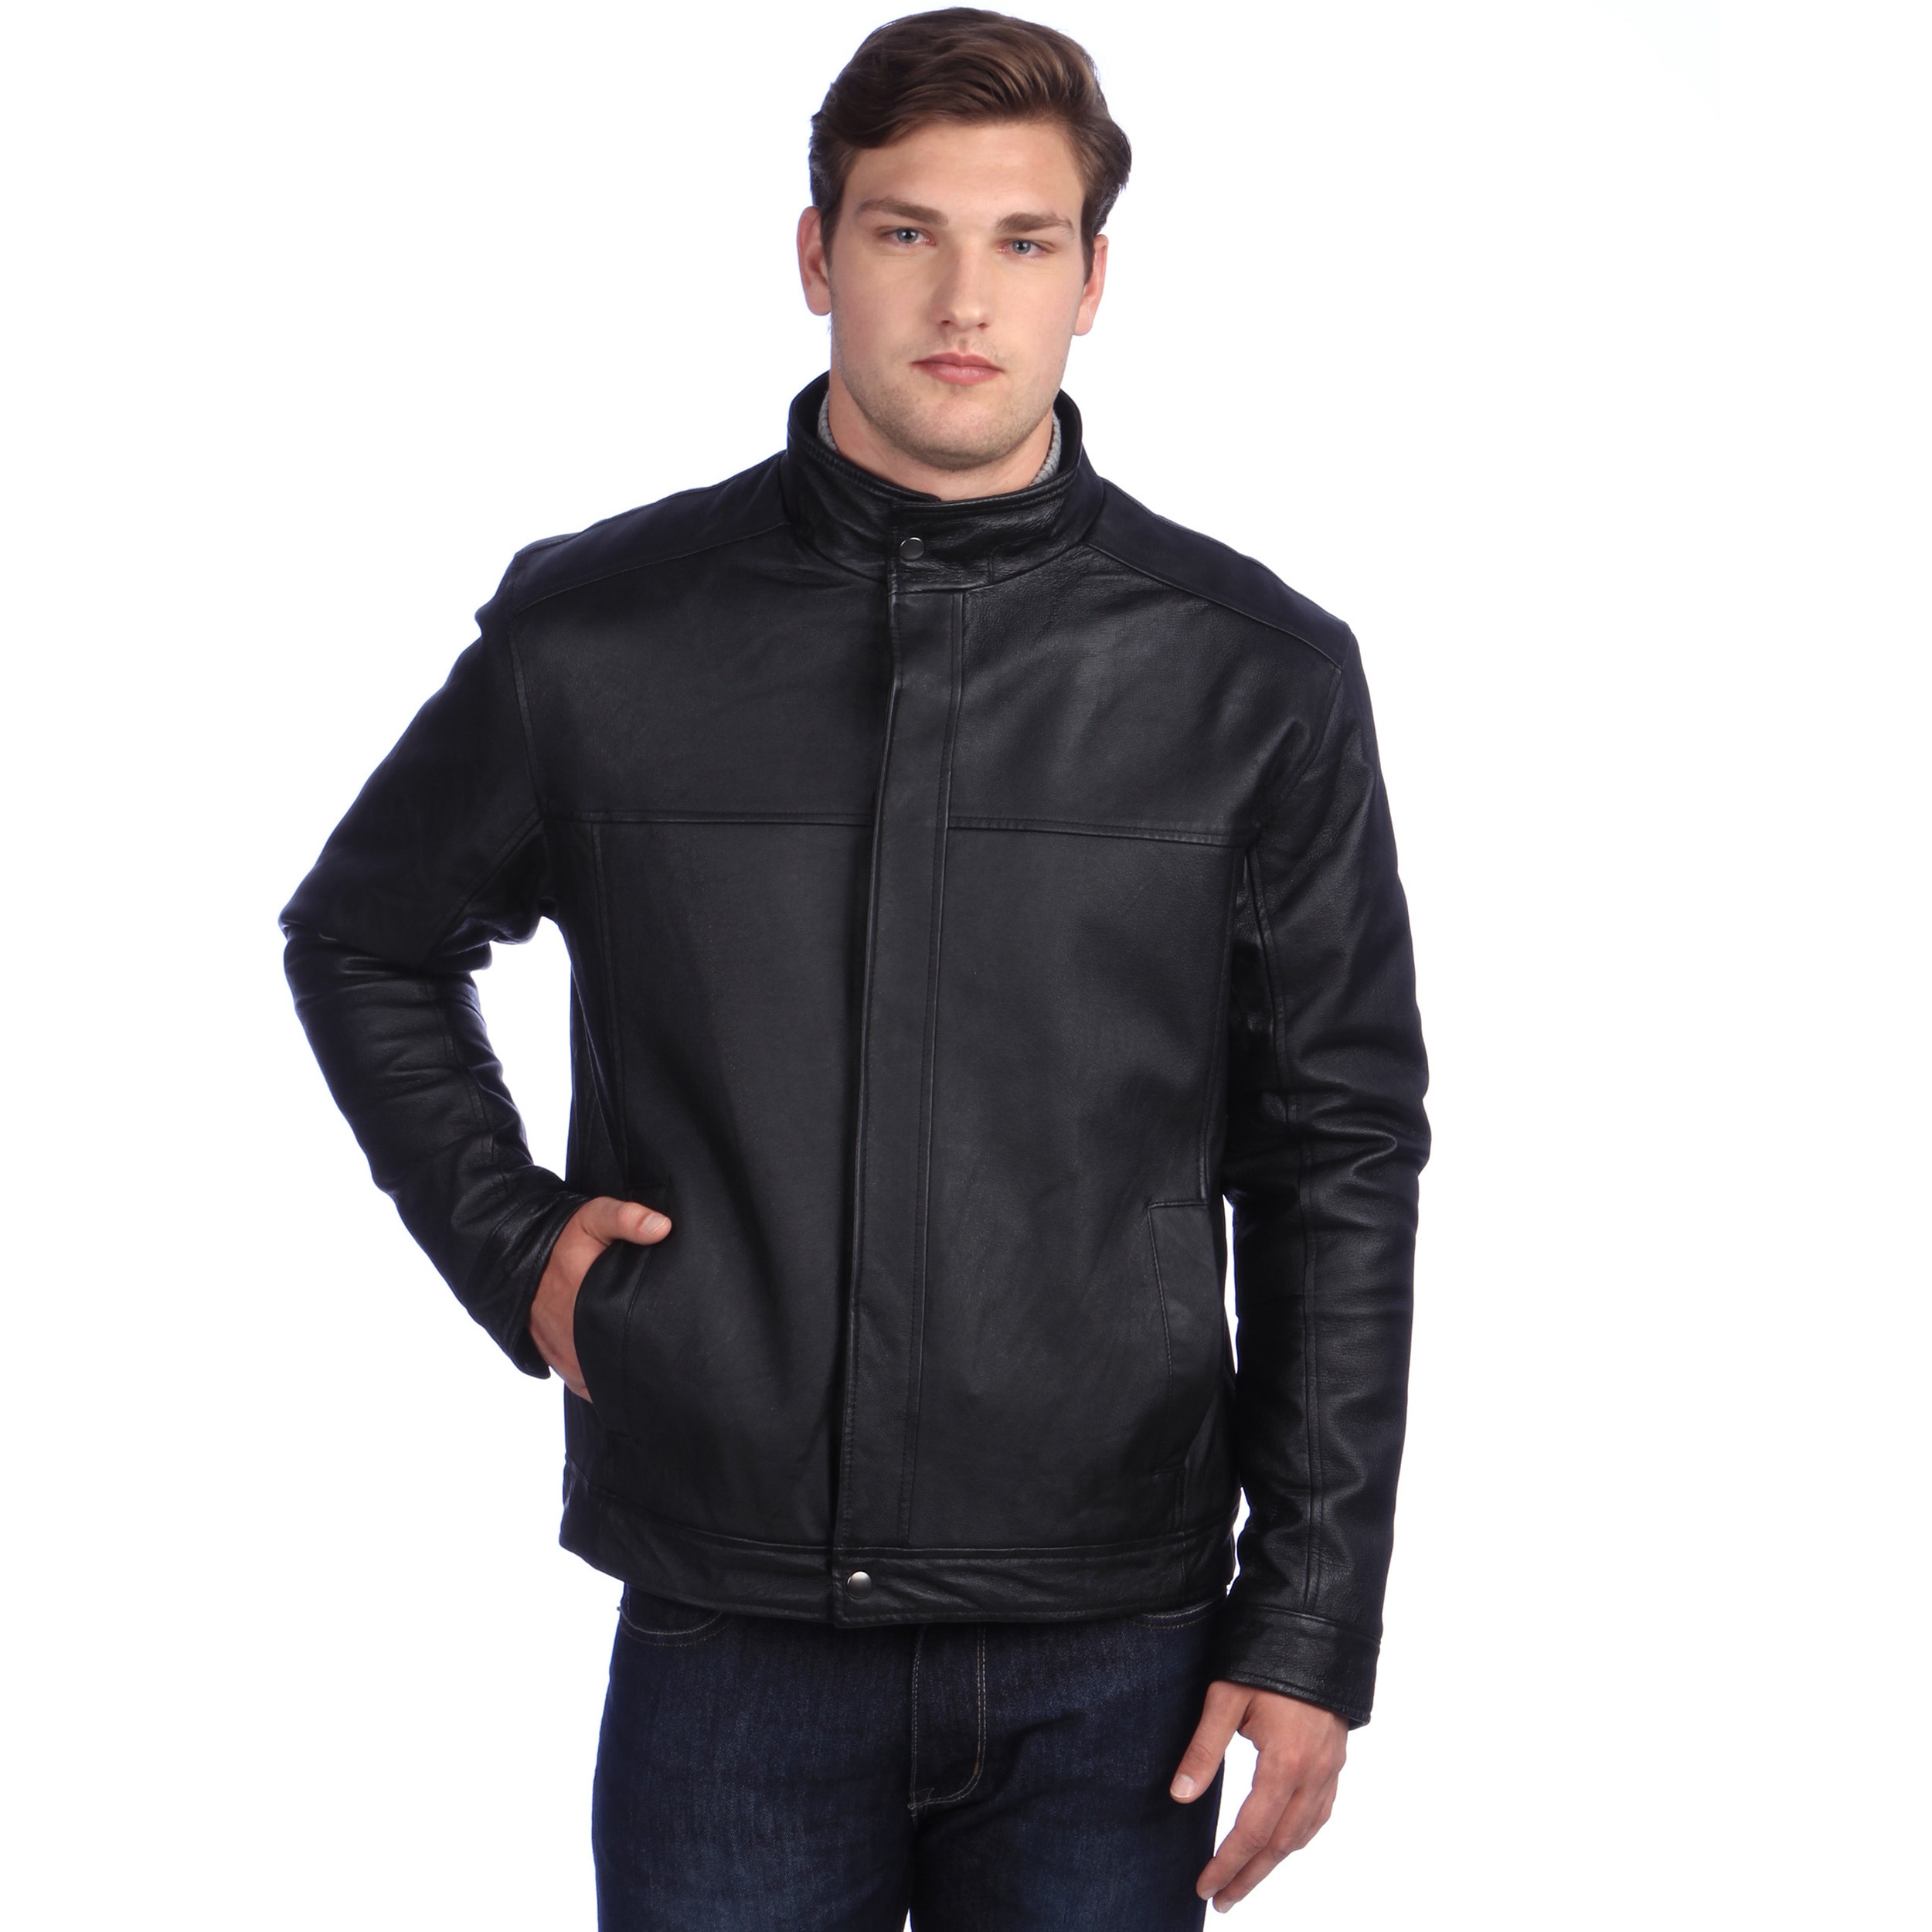 Ramonti Mens Stand Up Collar Black Leather Jacket $108.99   $234.99 3